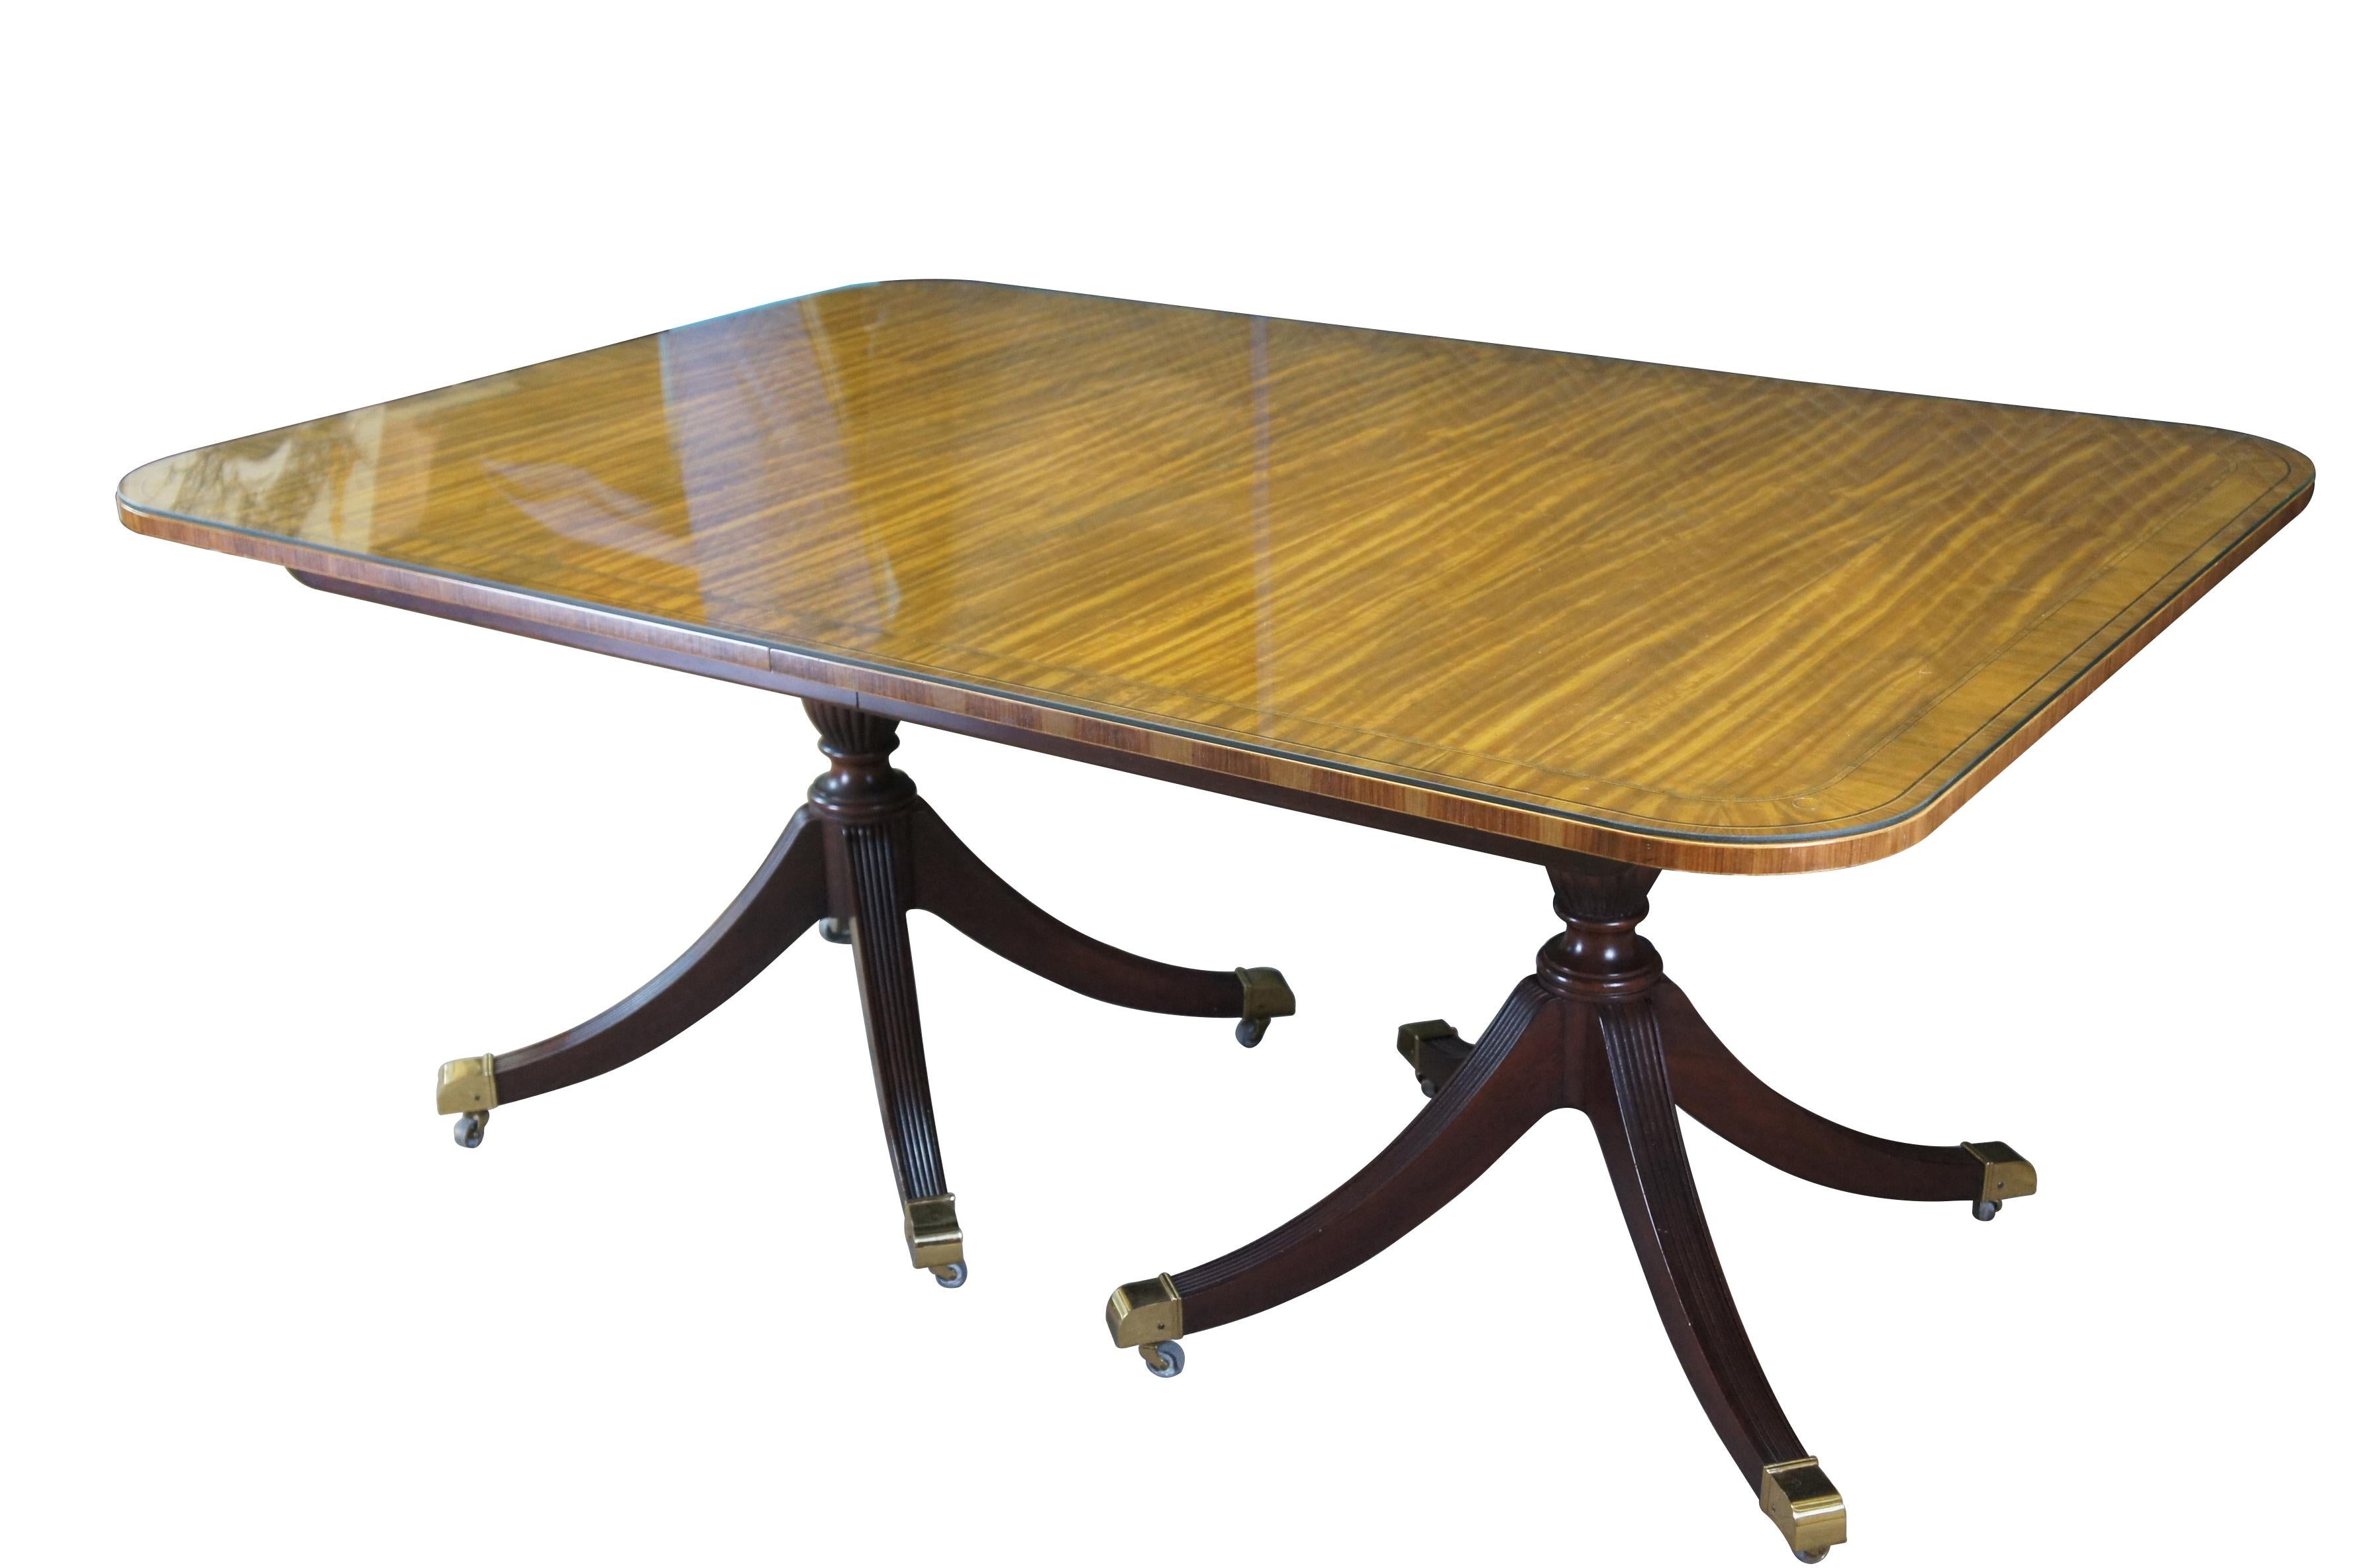 Baker Furniture Collector's Edition Duncan Phyfe dining table.  Features an impressive satinwood banded top with custom made protective glass covering.  The table is supported by a double pedestal mahogany base with shapely reeded urns over four